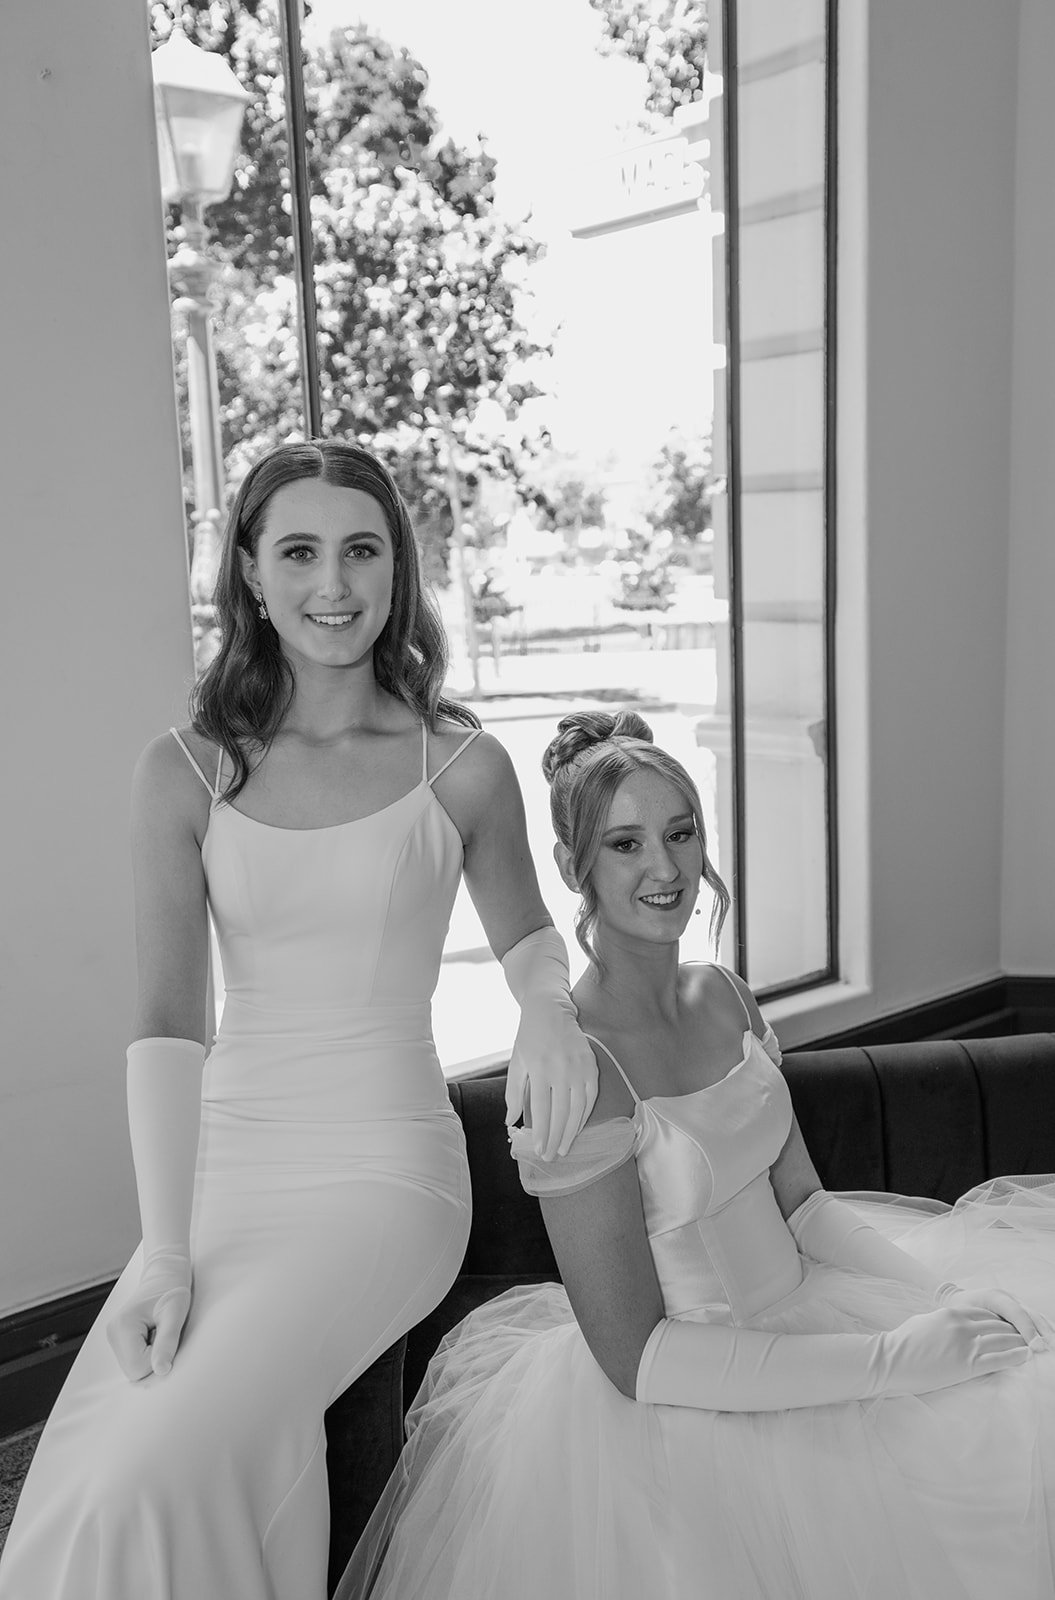 ABBEY AND LILLIANNA - FRONT BW.jpg